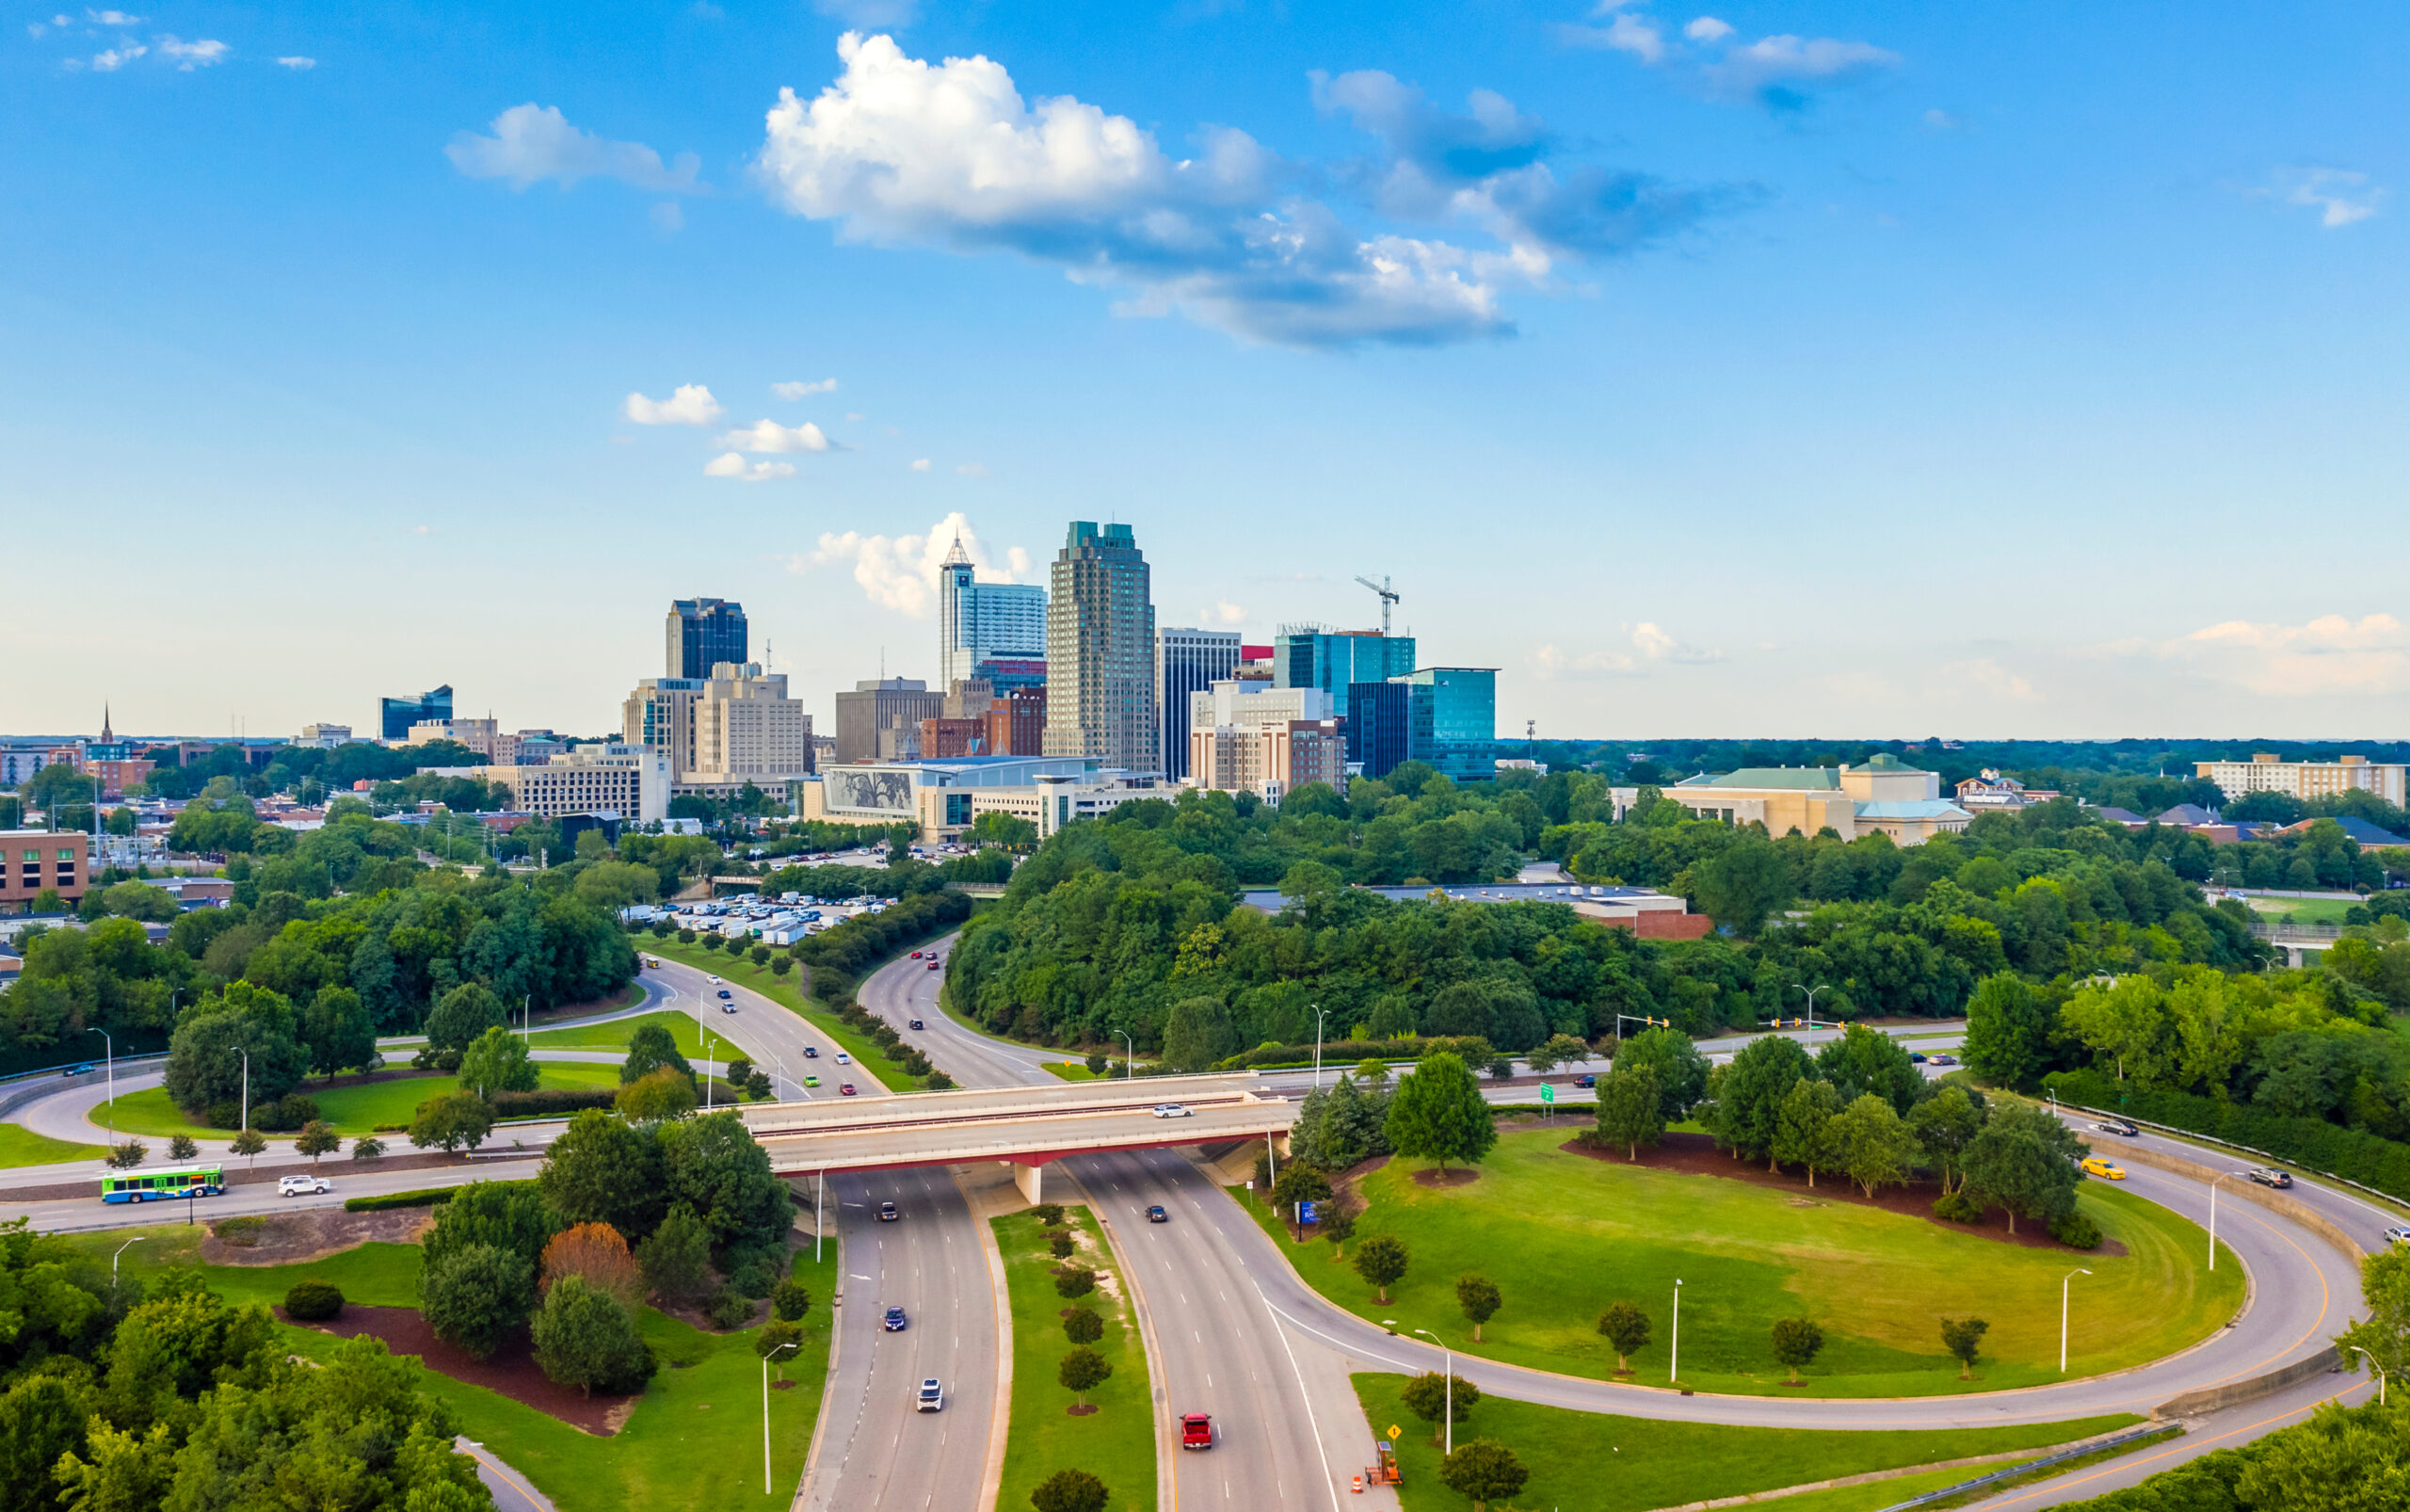 Raleigh vs. Charlotte: Pros and Cons of North Carolina Cities